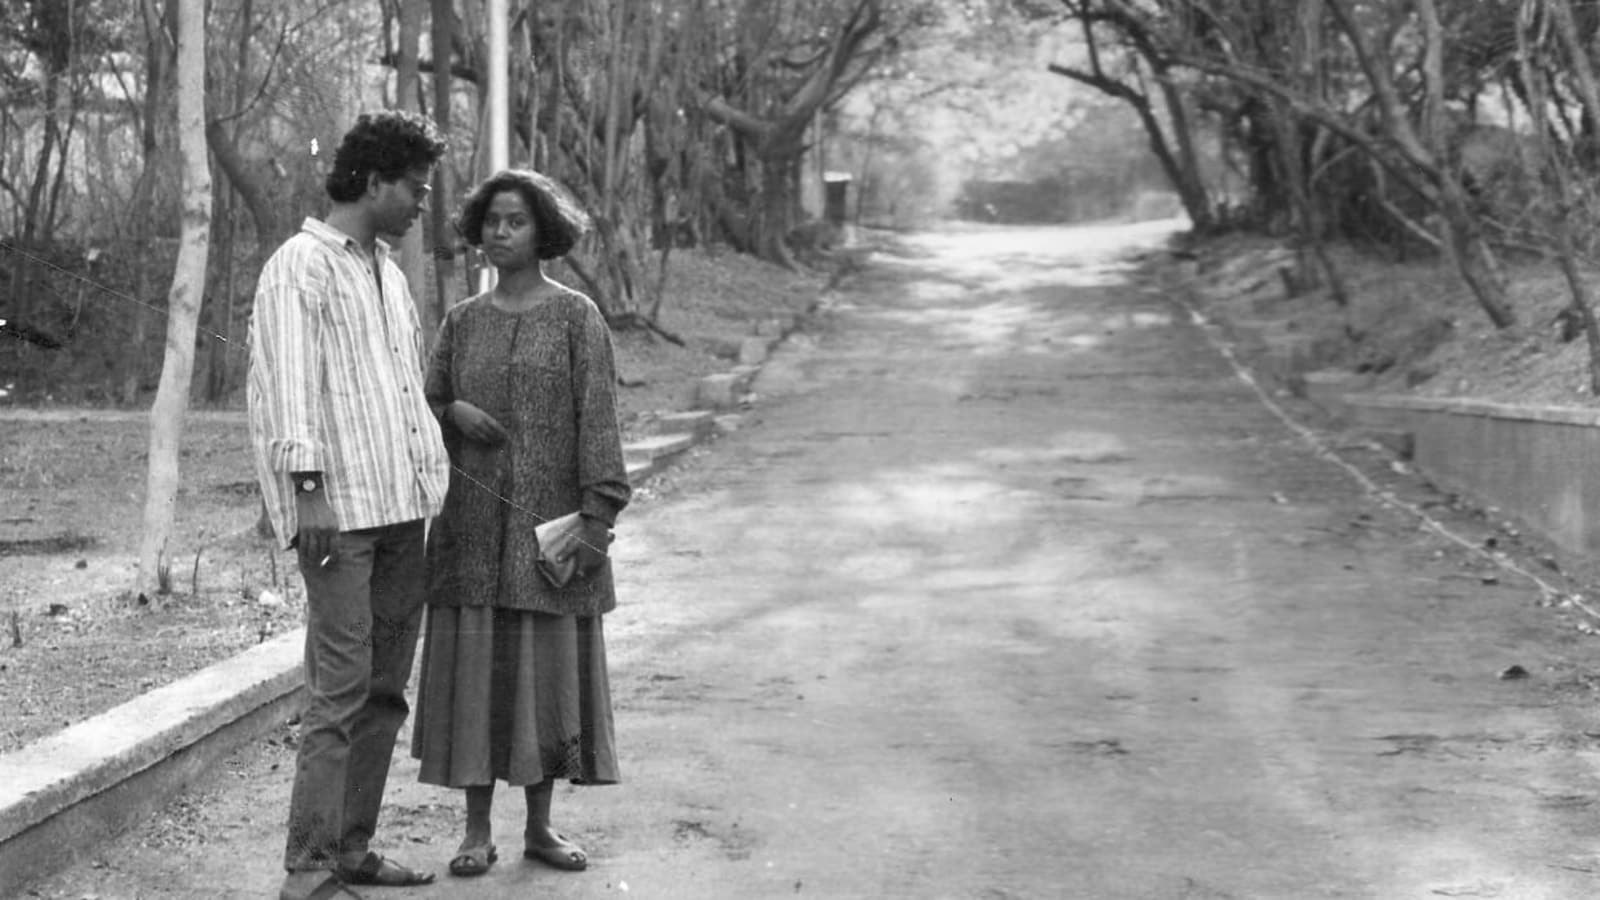 Hindi News: Sutapa Sikdar recalls younger days with Irrfan Khan as she revisits FTII with son Babil. See throwback photos